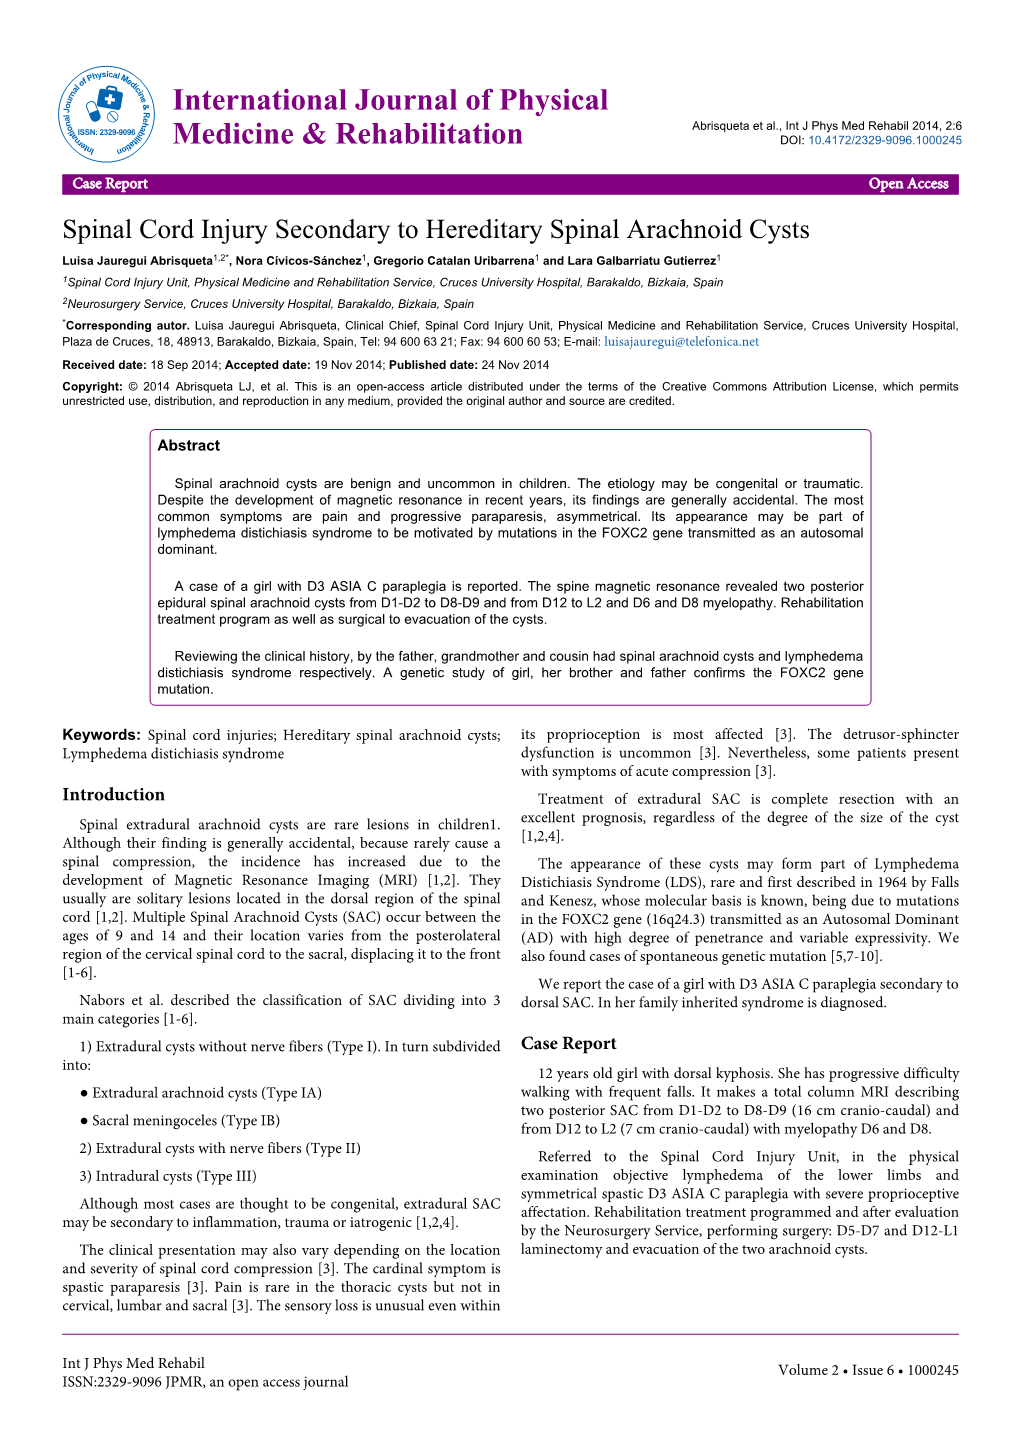 Spinal Cord Injury Secondary to Hereditary Spinal Arachnoid Cysts